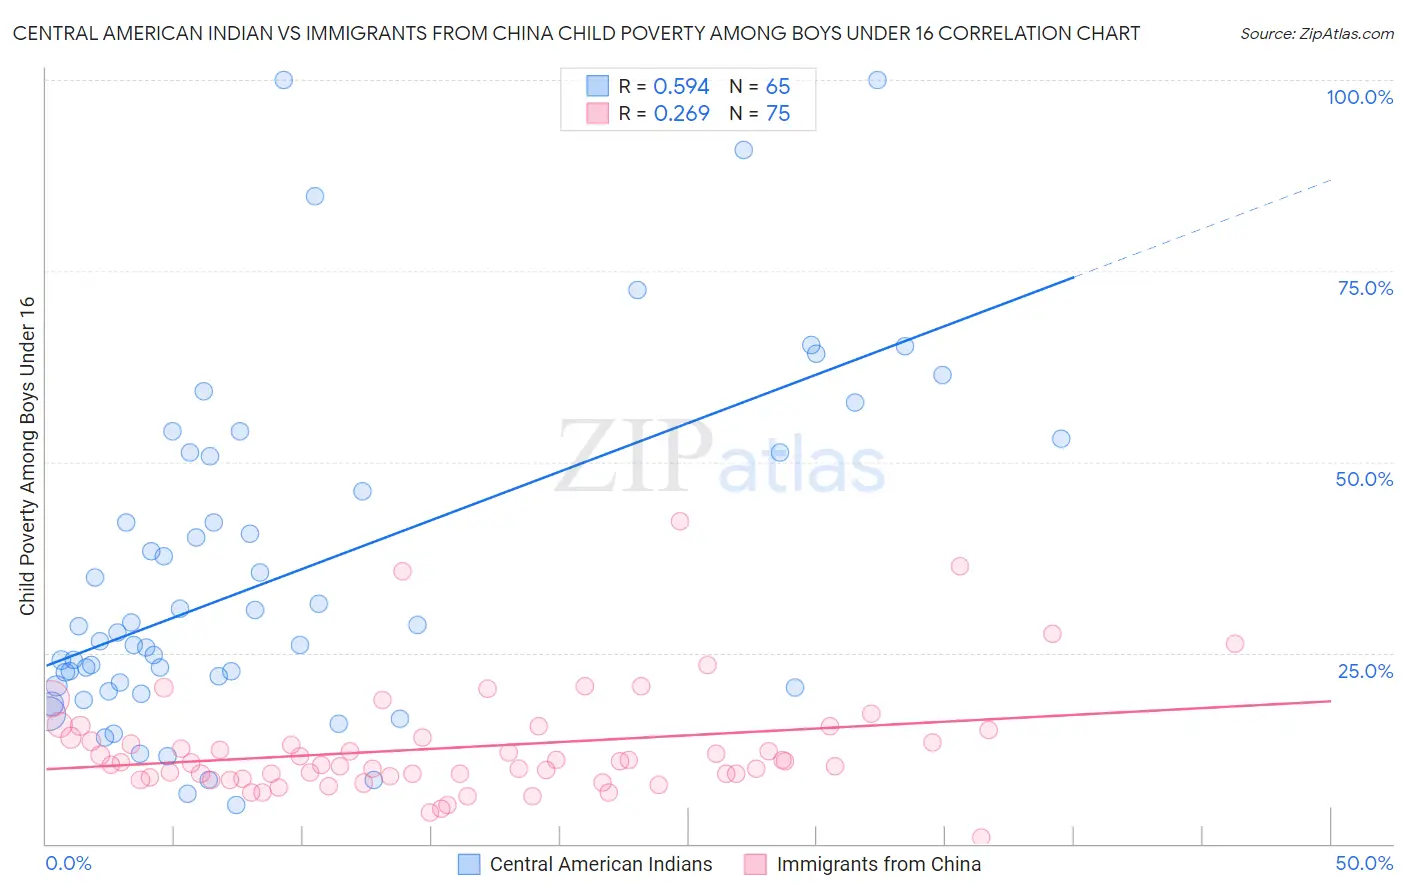 Central American Indian vs Immigrants from China Child Poverty Among Boys Under 16